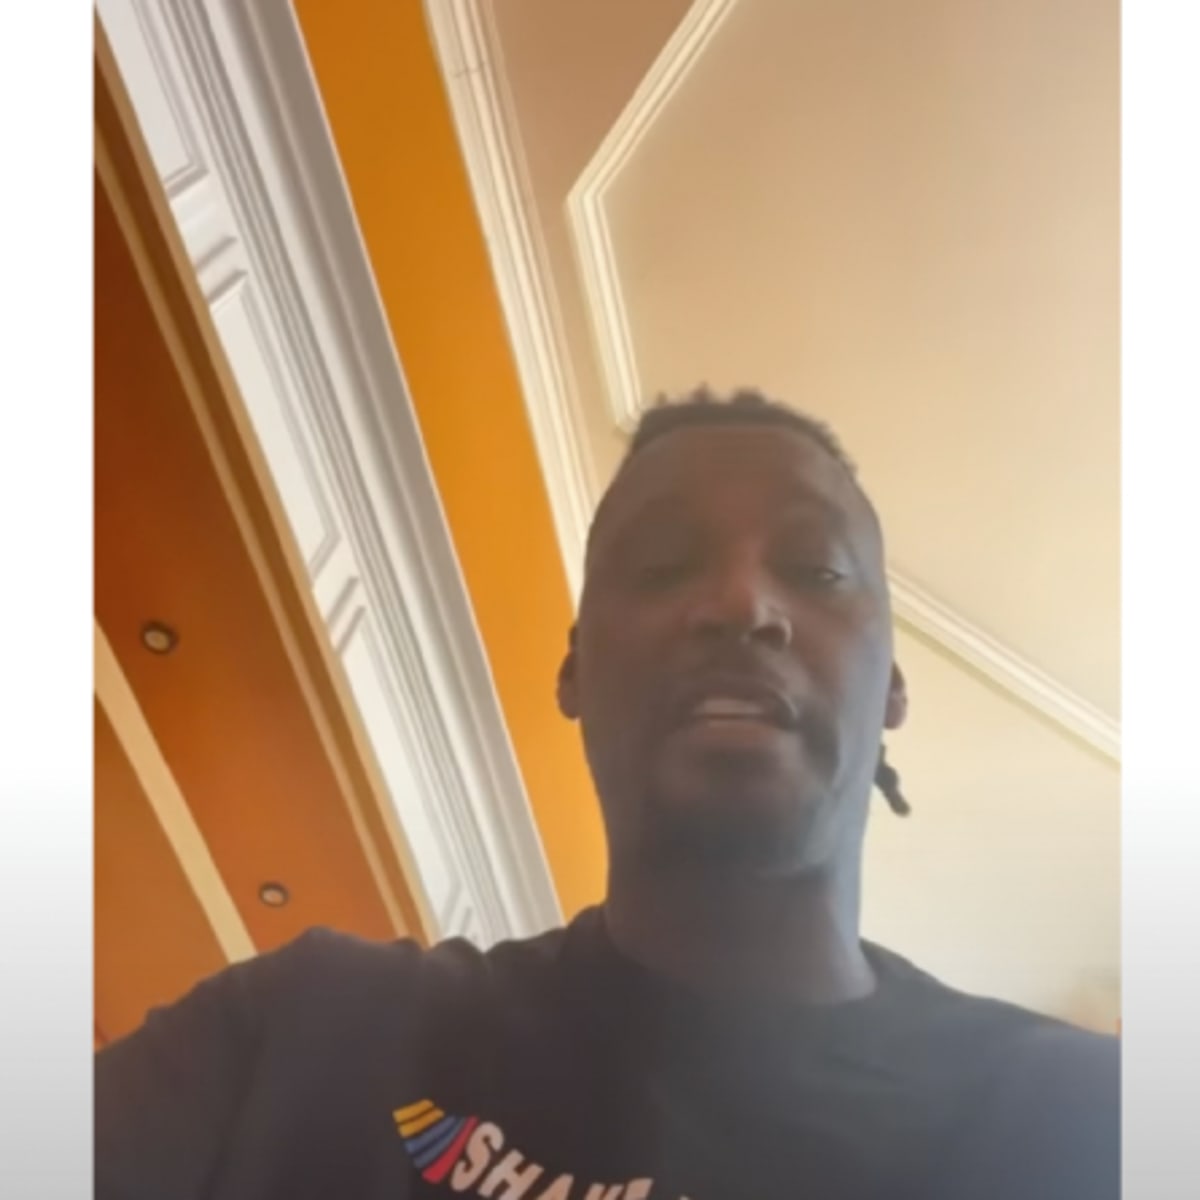 Kwame Brown goes off on Ja Morant - Basketball Network - Your daily dose of  basketball